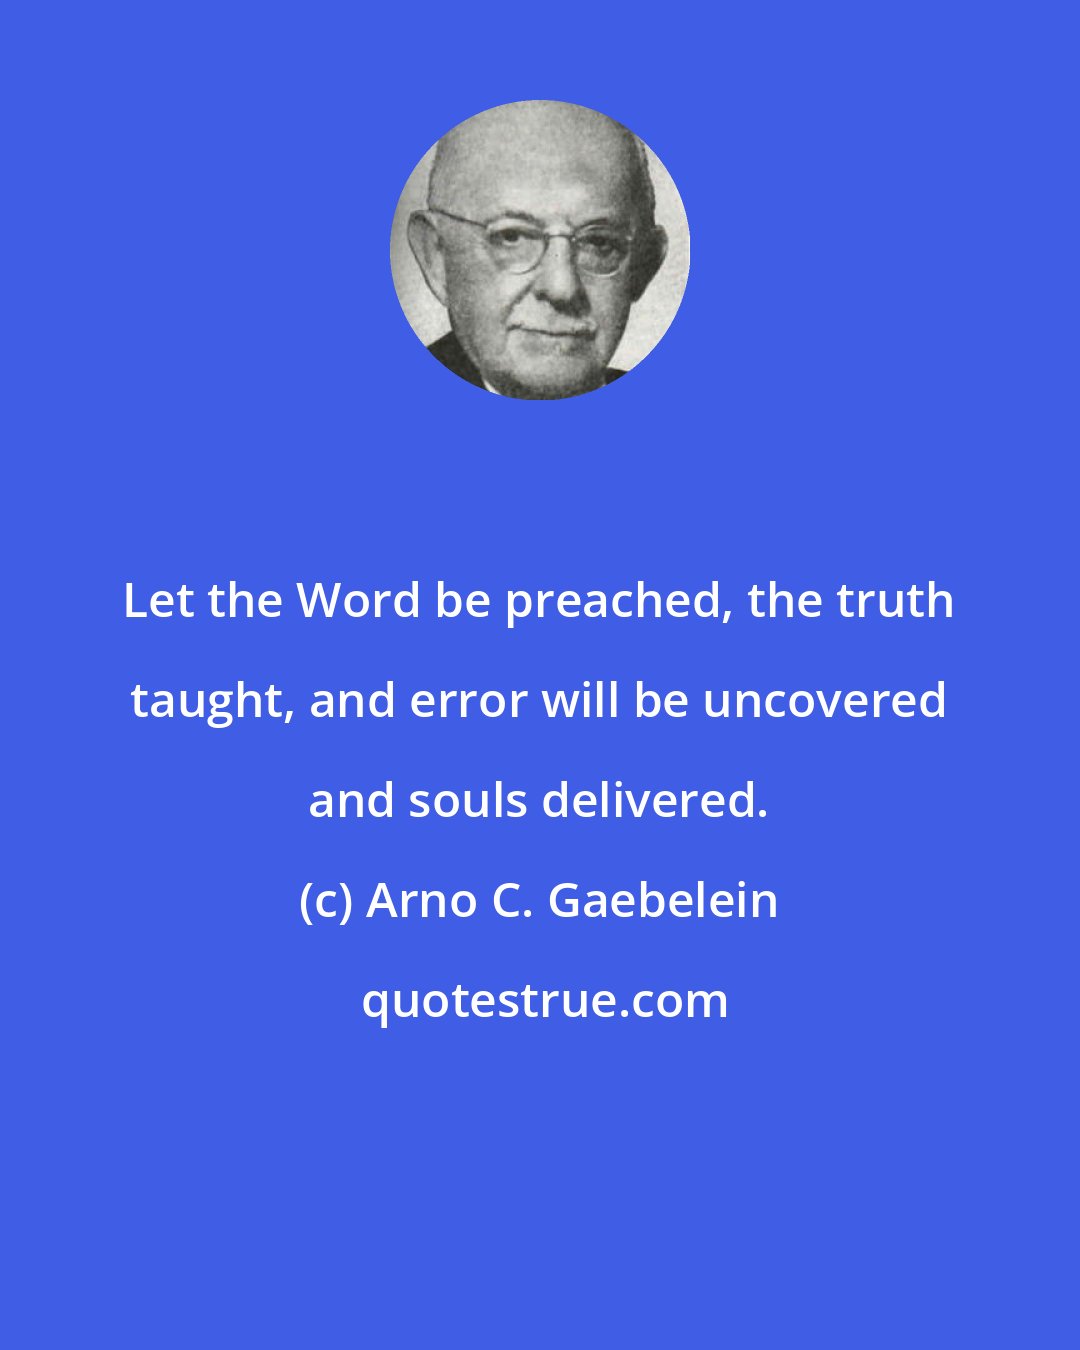 Arno C. Gaebelein: Let the Word be preached, the truth taught, and error will be uncovered and souls delivered.